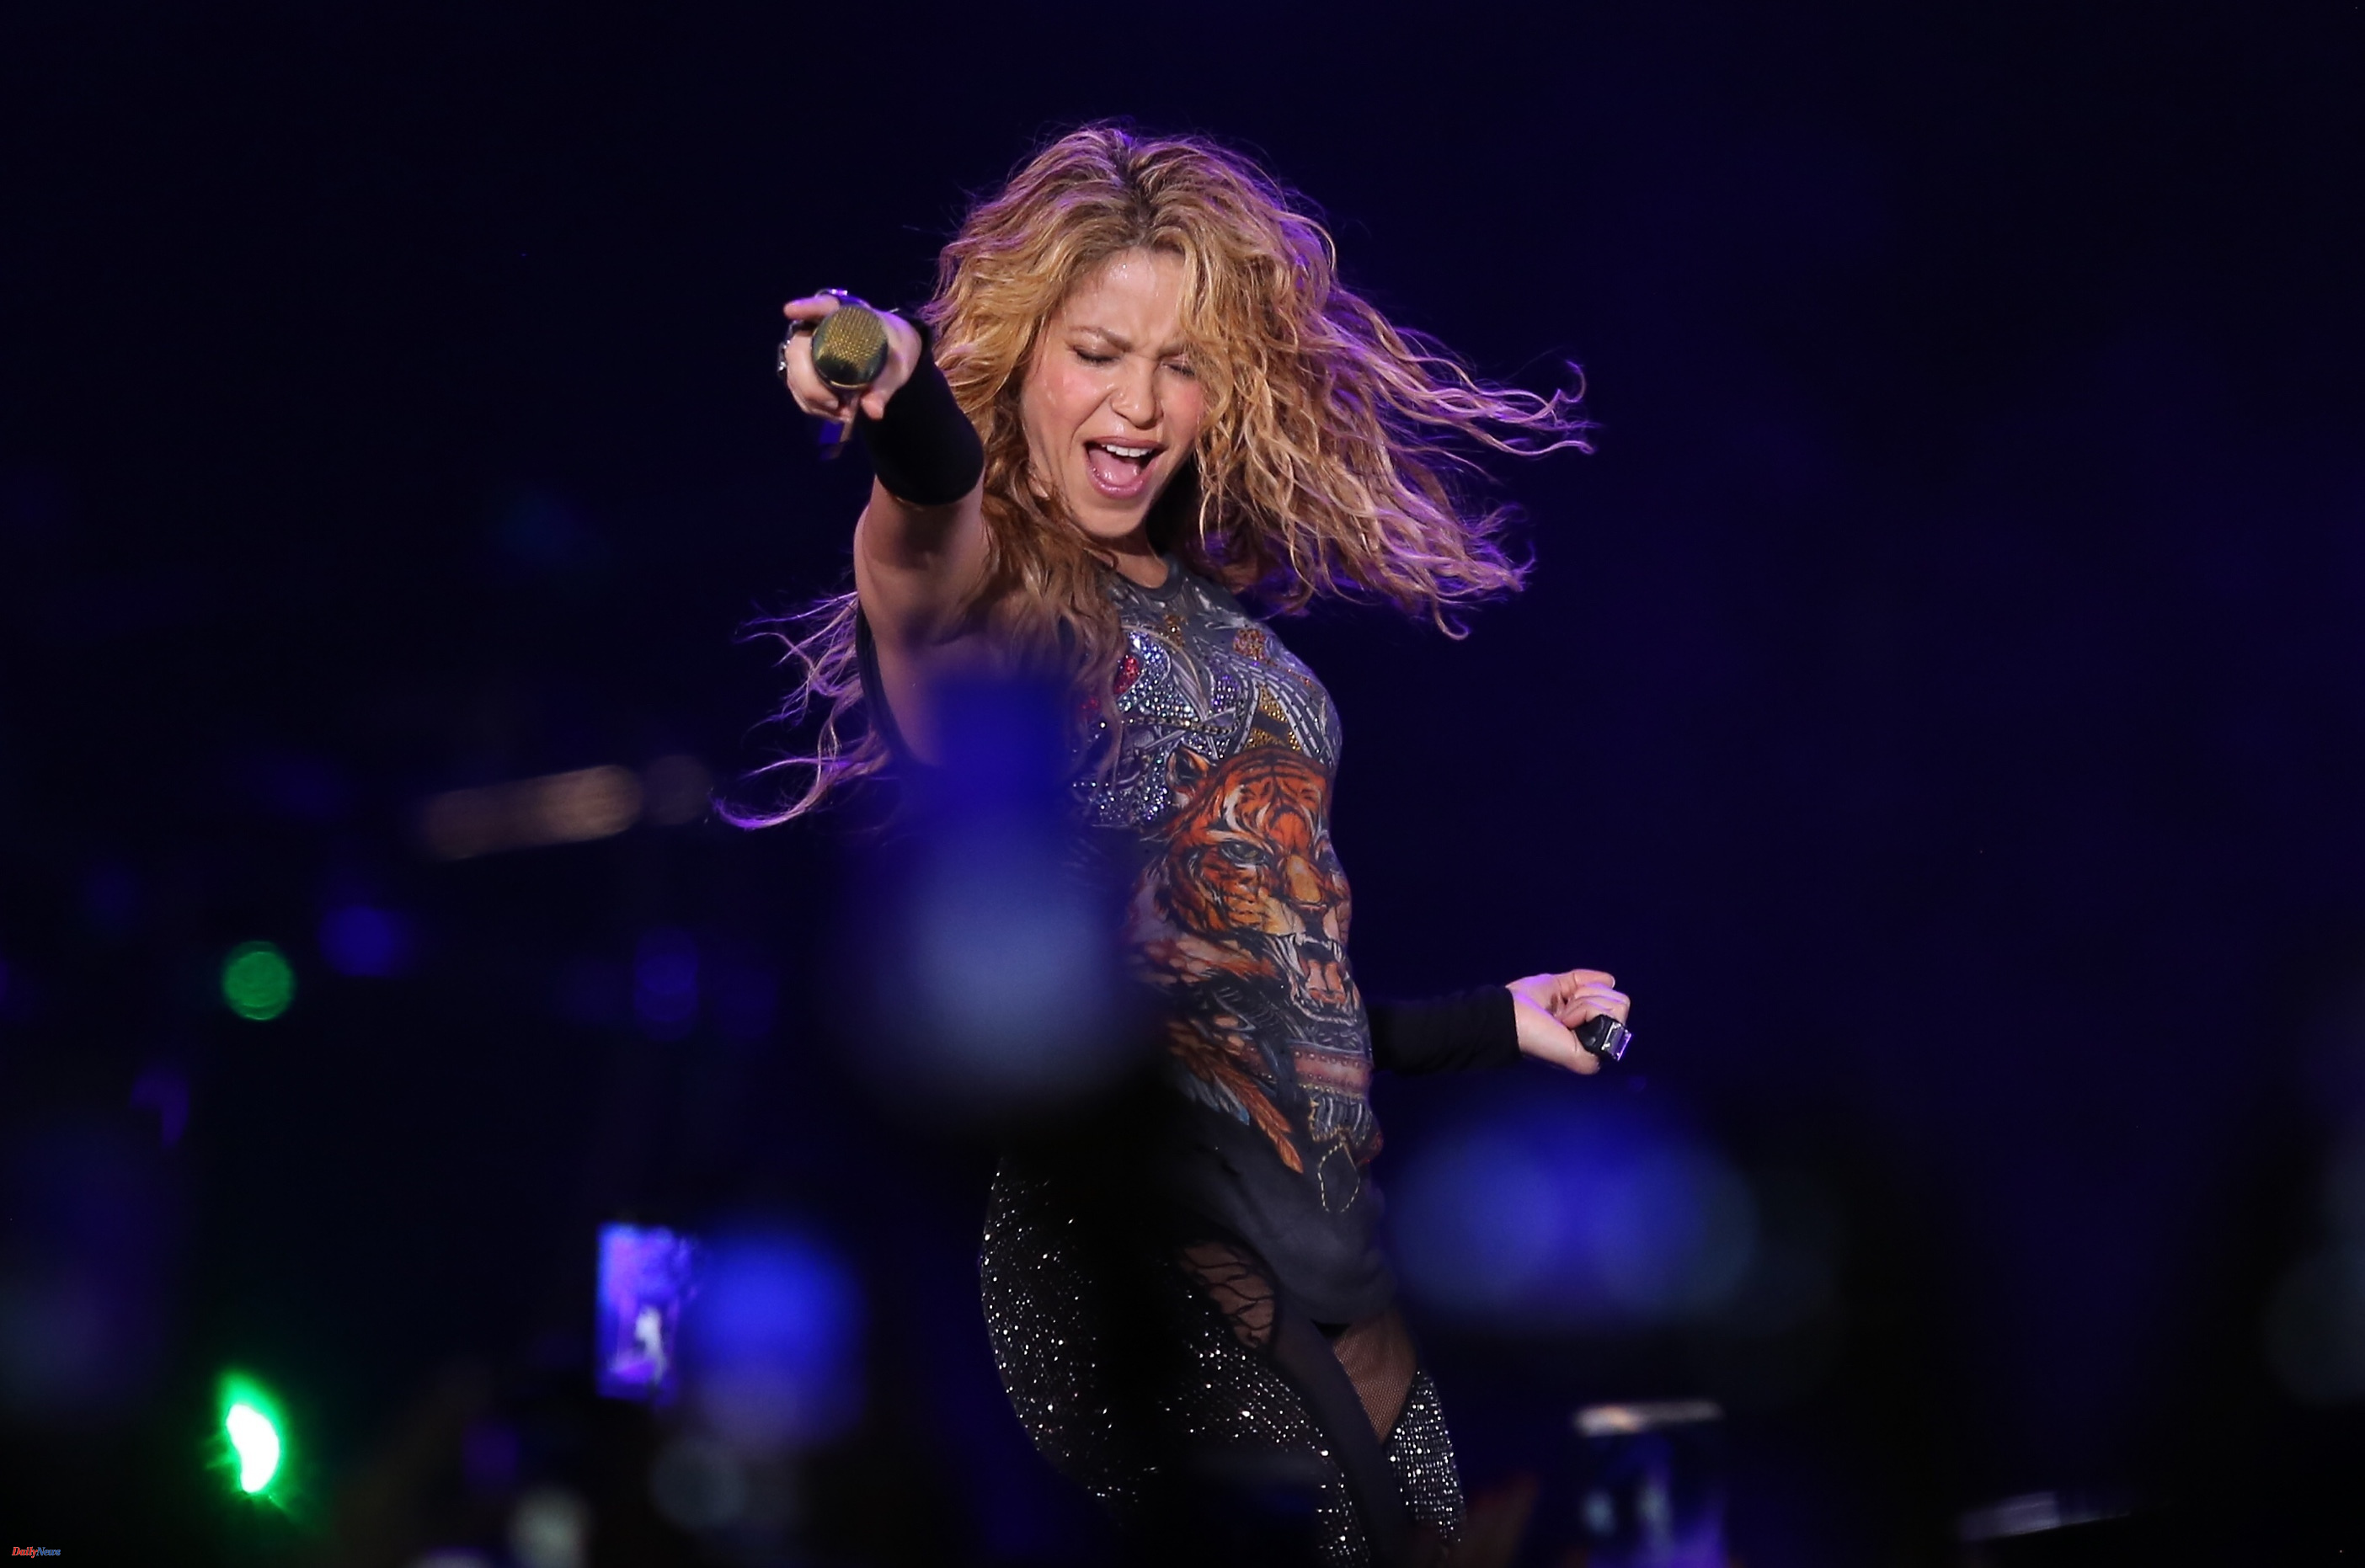 LOC A man is arrested in Miami accused of harassing Shakira